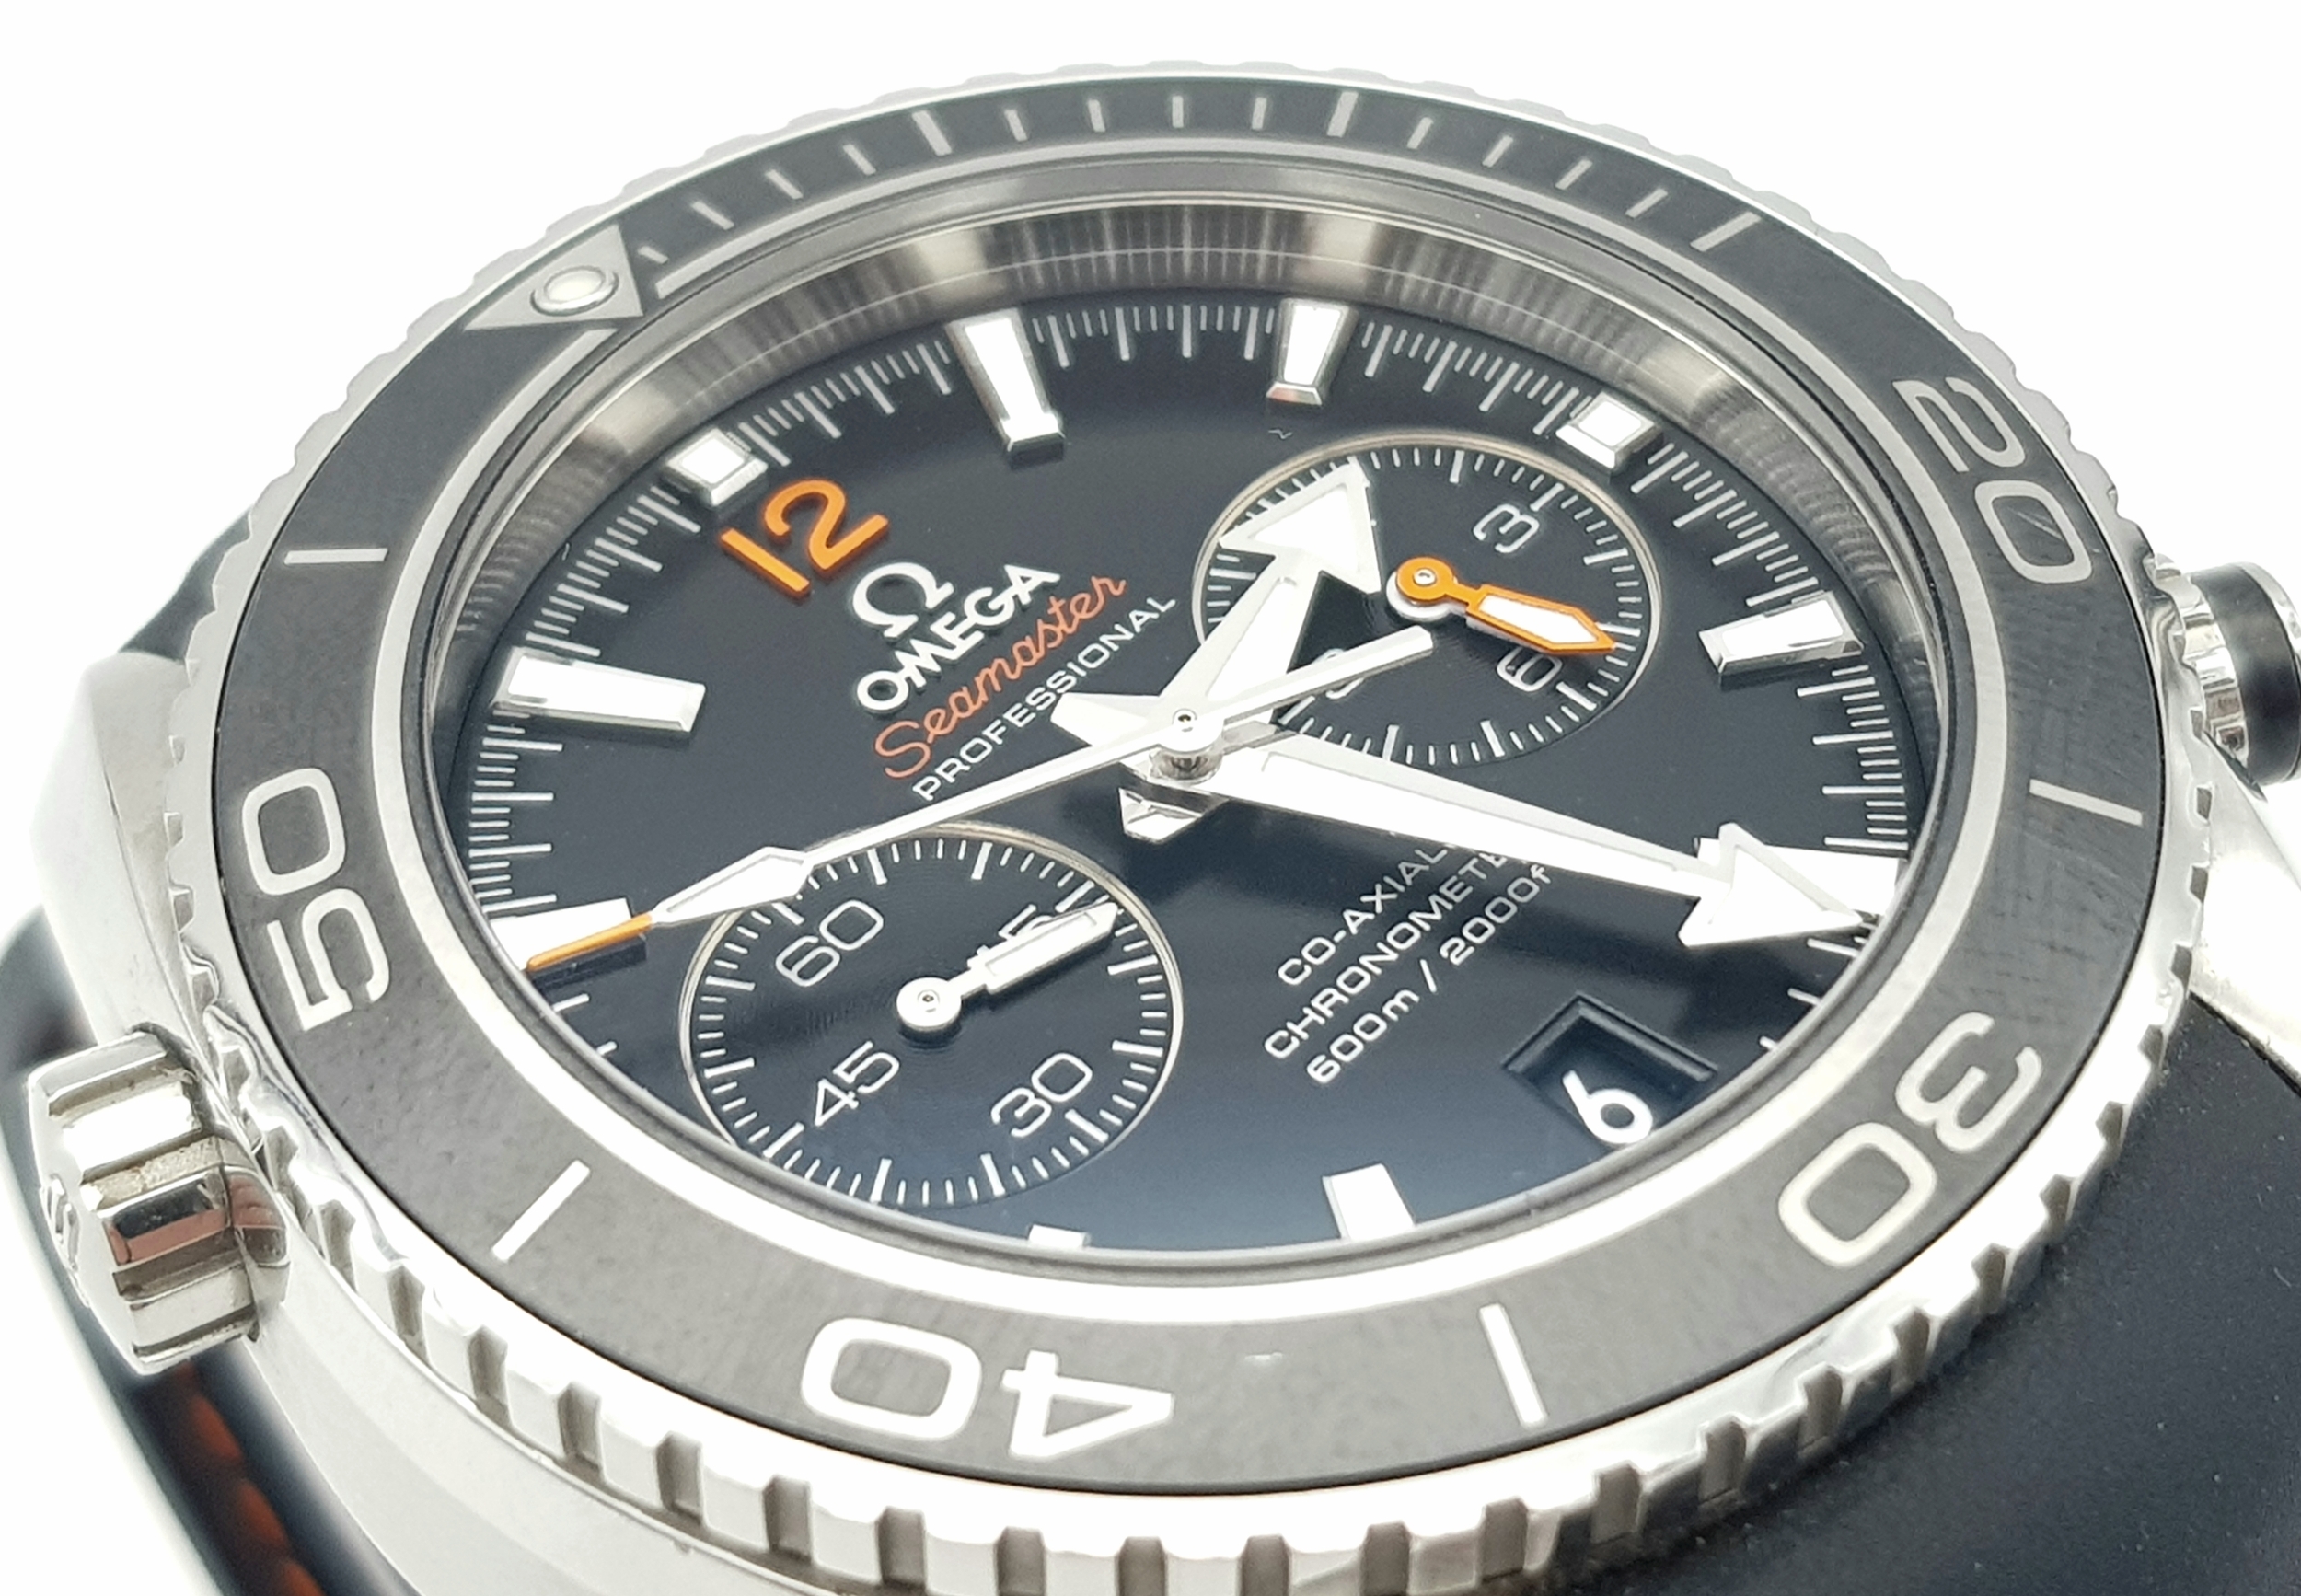 A FANTASTIC EXAMPLE OF AN OMEGA "SEAMASTER" PROFESSIONAL CO-AXIAL CHRONOMETER WITH 2000FT LIMIT . - Image 6 of 8